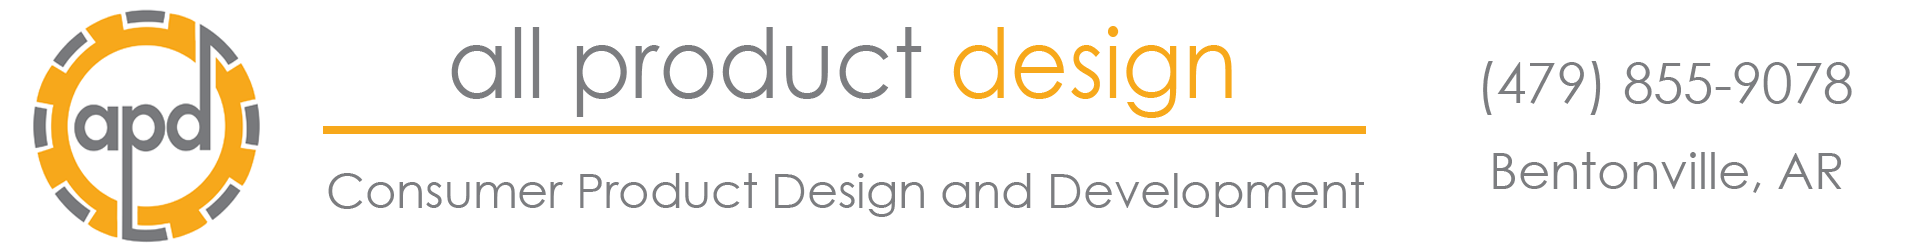 All Product Design